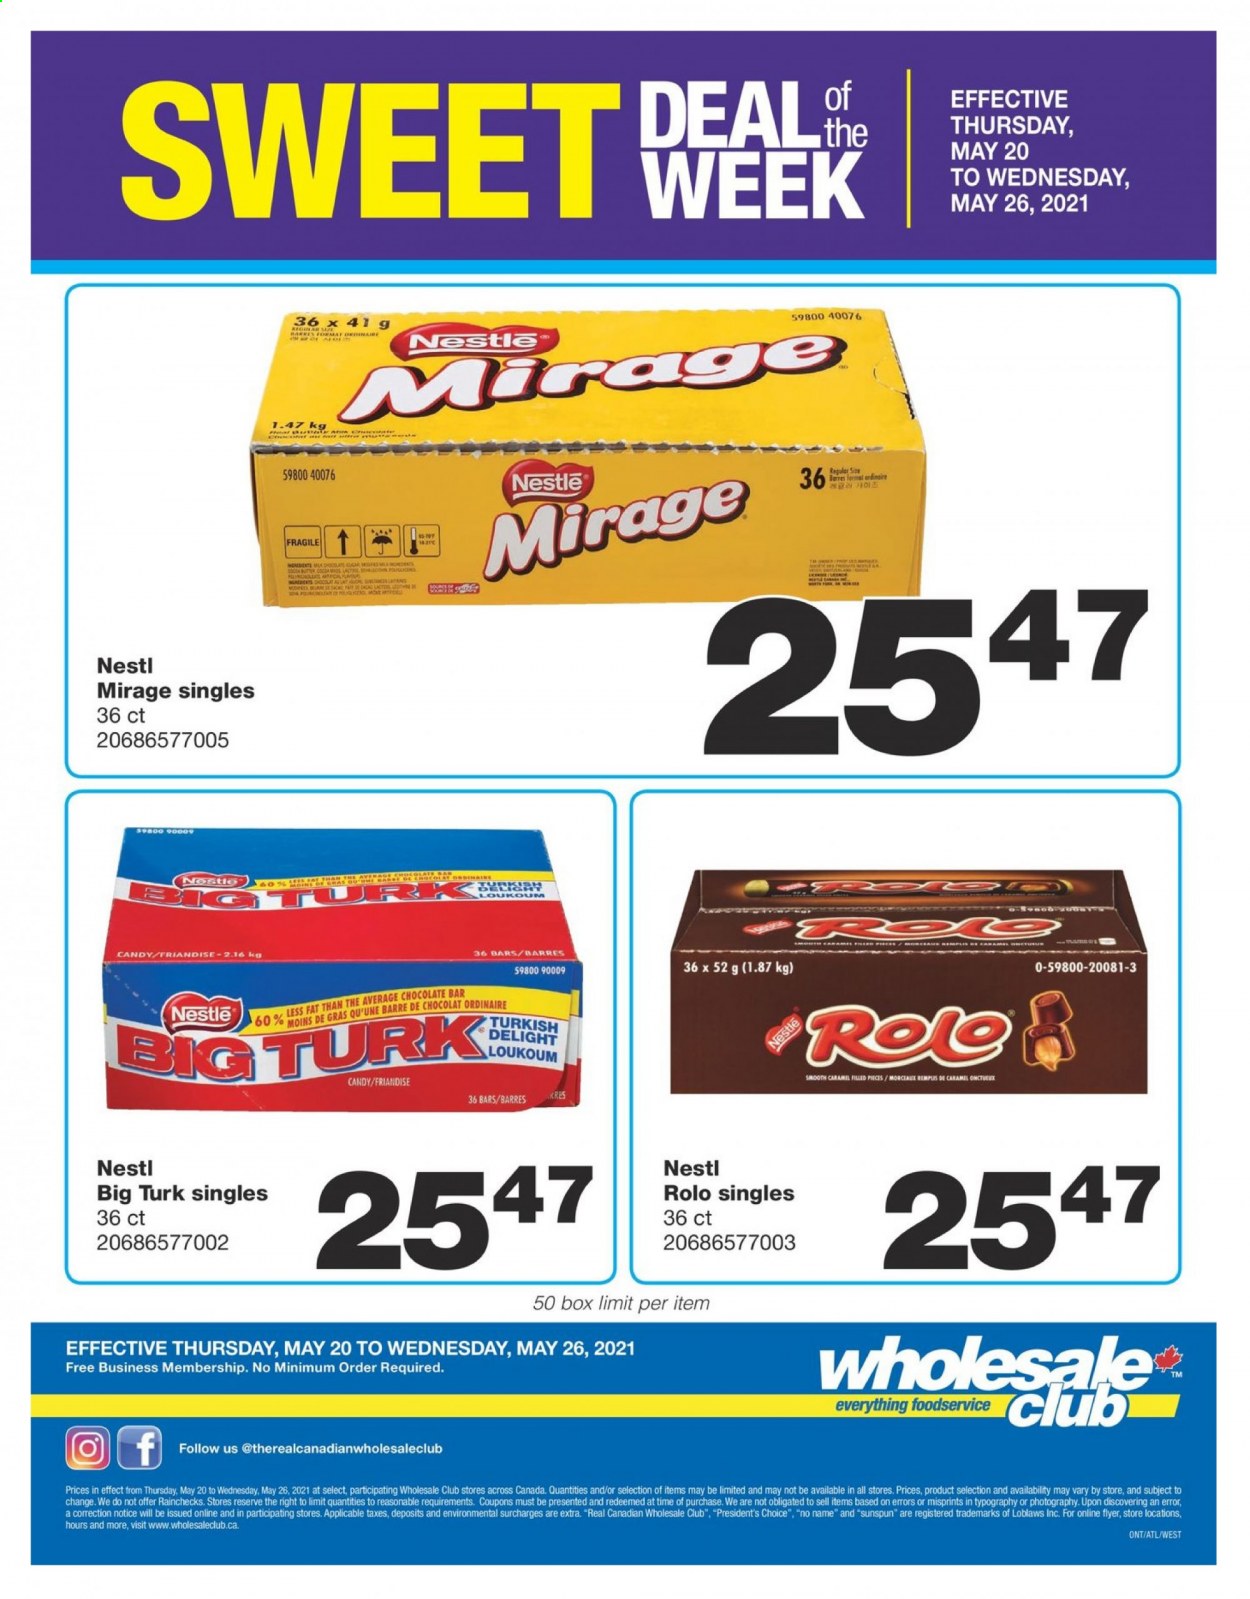 thumbnail - Wholesale Club Flyer - May 20, 2021 - May 26, 2021 - Sales products - No Name, Président, chocolate bar, caramel, Moët & Chandon, Nestlé. Page 1.